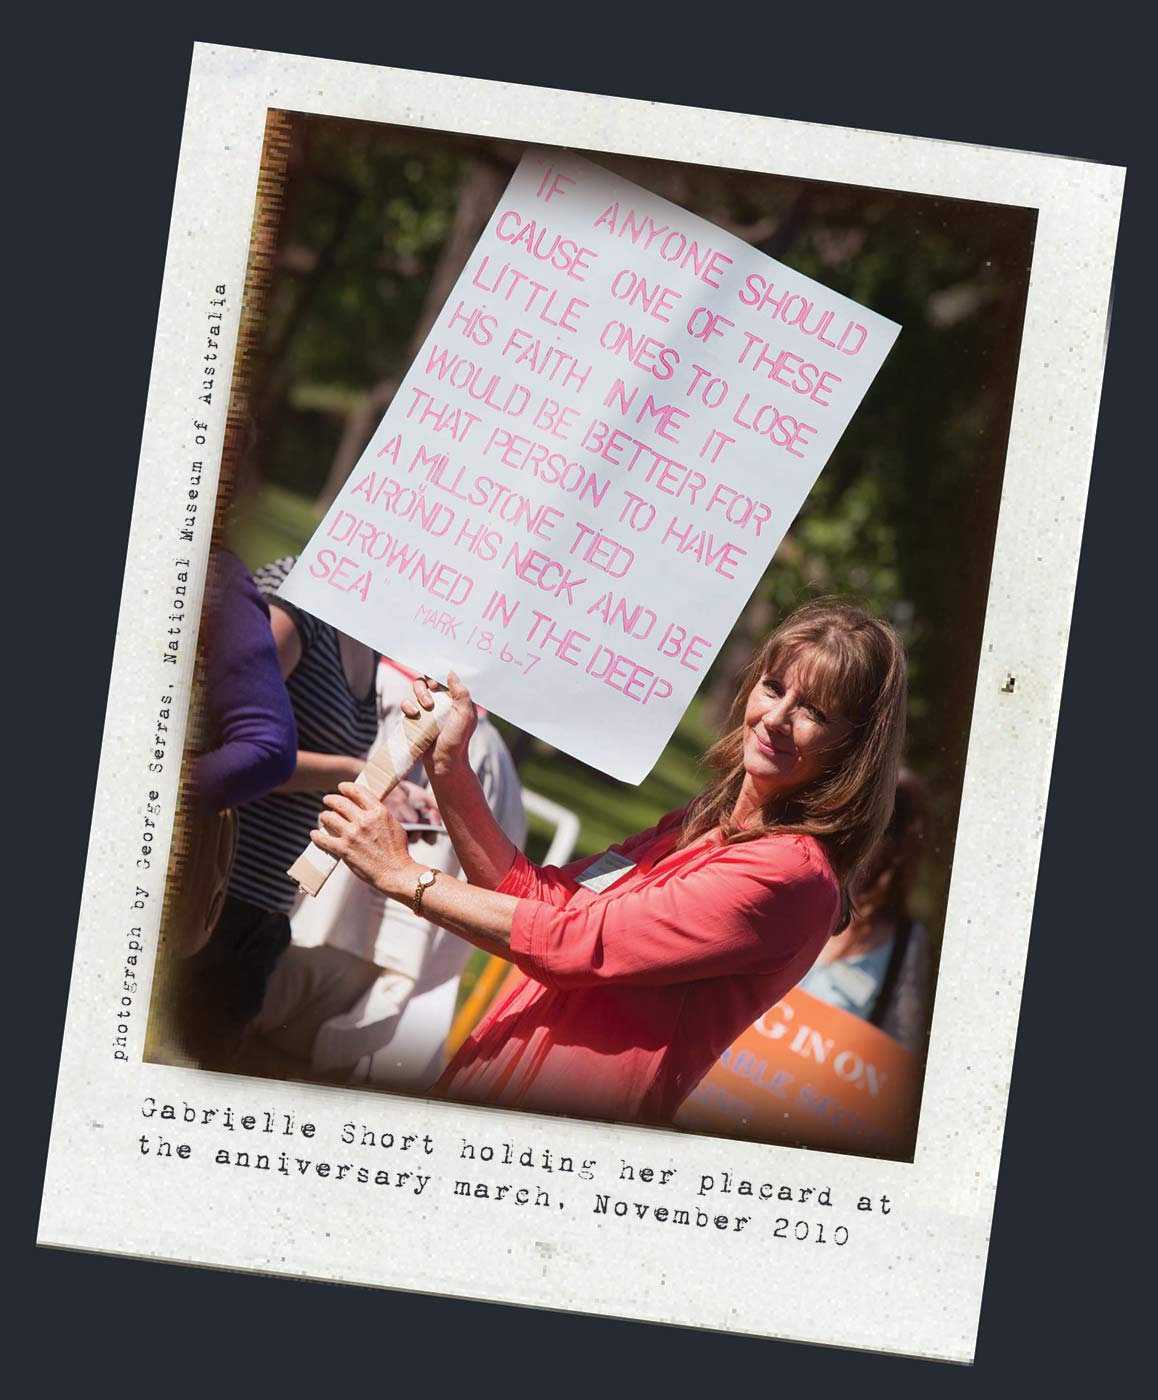 A Polaroid photo of a woman holding a banner on a white cardboard sheet. Typewritten text below reads 'Gabrielle Short holding her placard at the anniversary march, November 2010.' 'Photograph by George Serras, National Museum of Australia' is printed along the left side. - click to view larger image